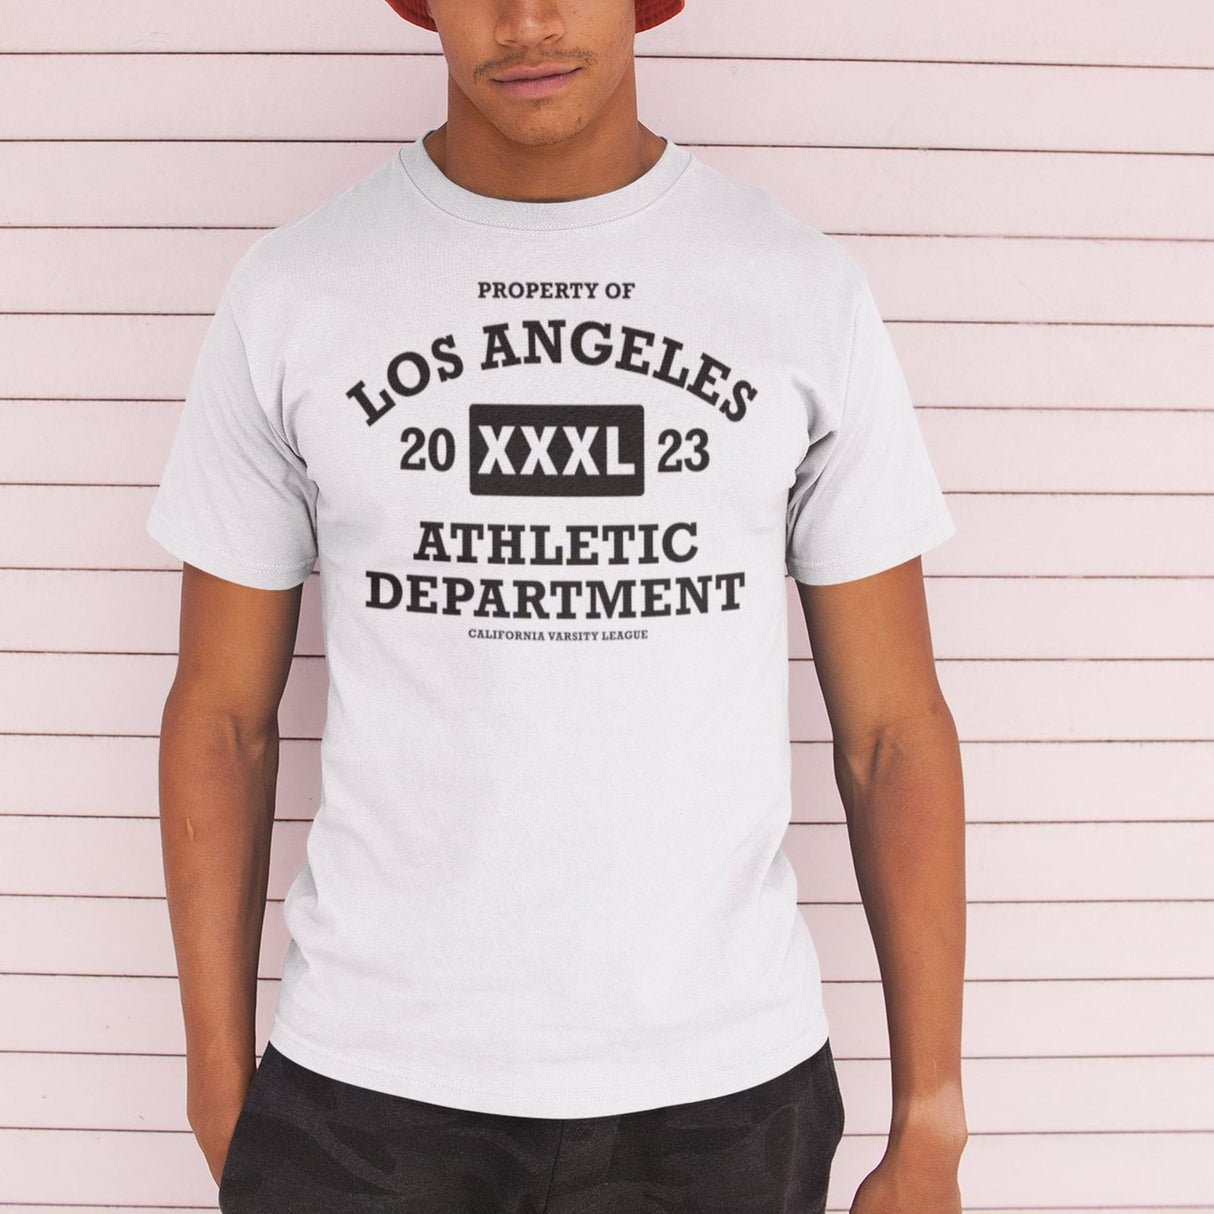 property-of-los-angeles-athletic-department-los-angeles-tee-california-t-shirt-fitness-tee-gym-t-shirt-workout-tee#color_white